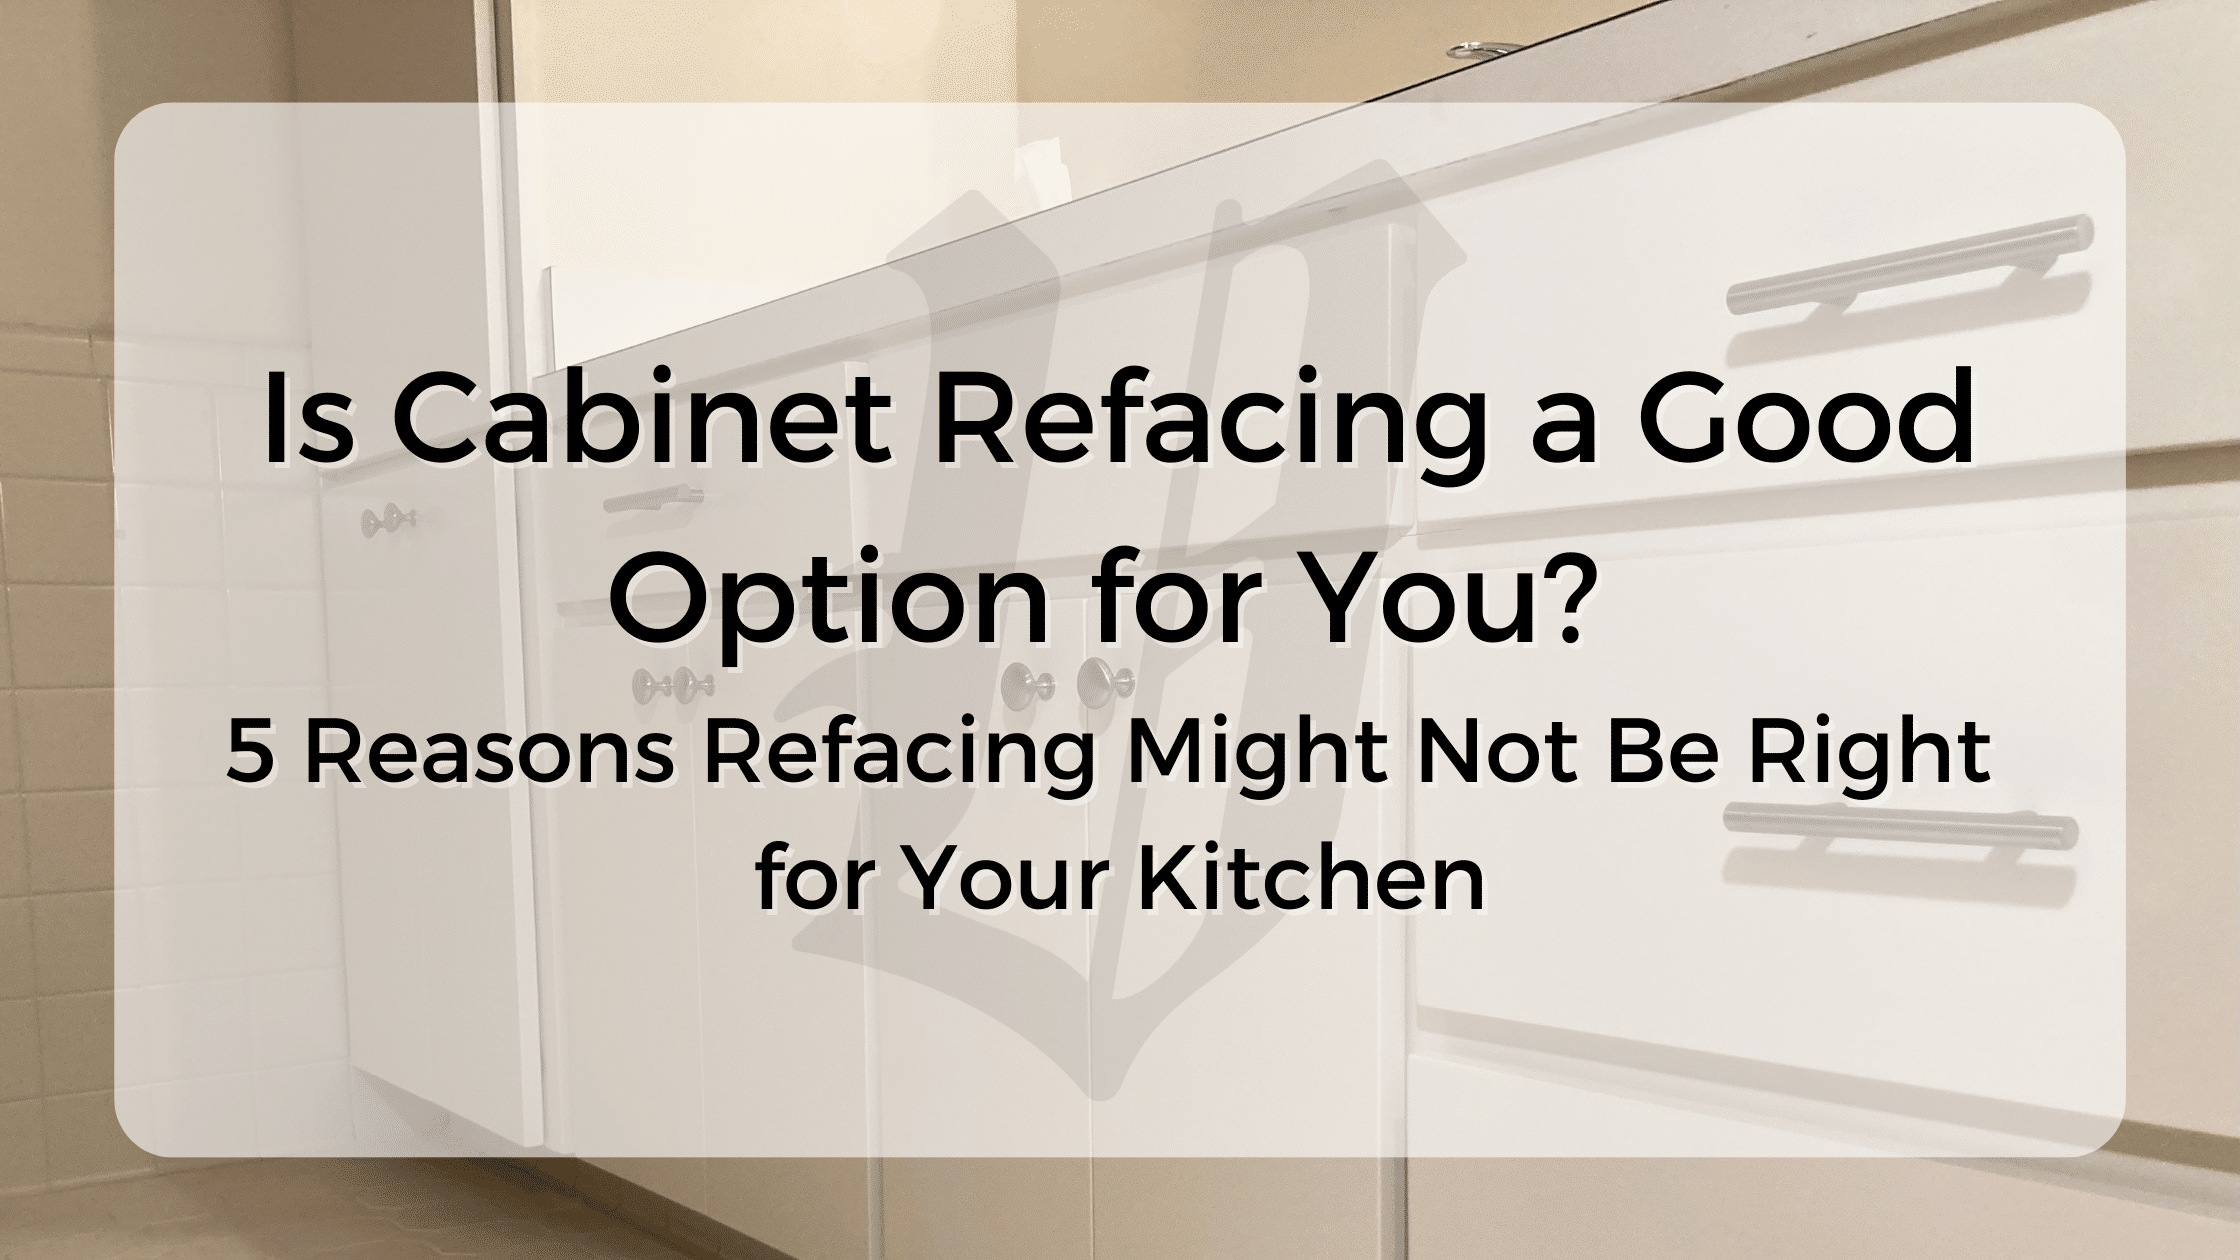 Is cabinet refacing a good option for you?